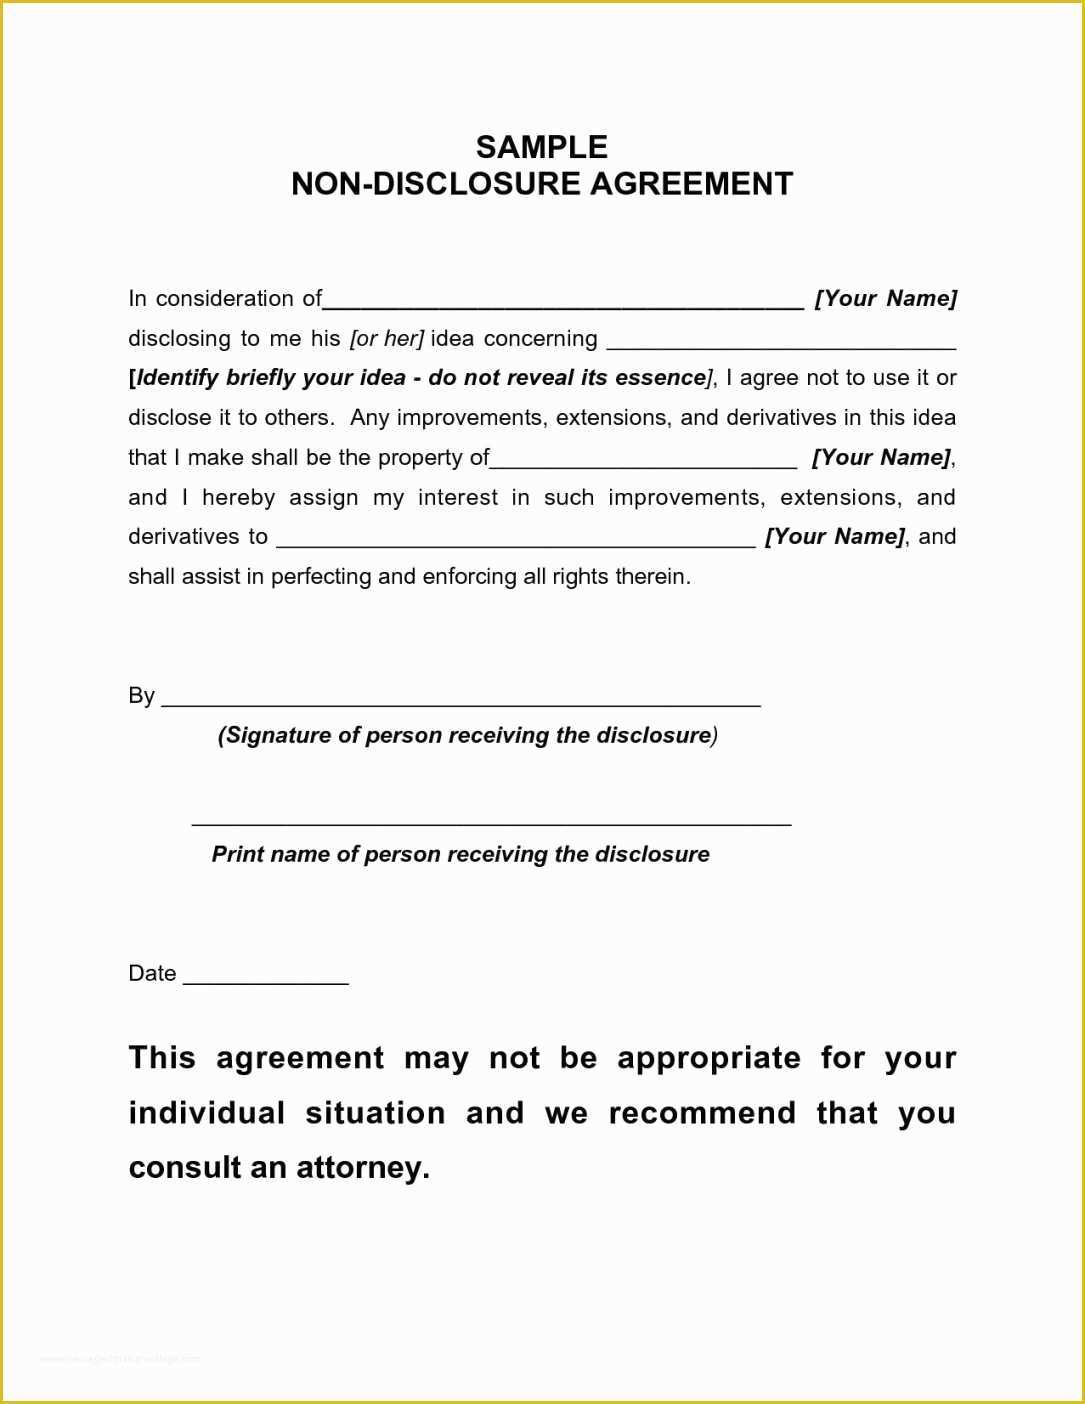 Free Non Disclosure Agreement Template Word Of Employee Non Disclosure and Confidentiality Agreement